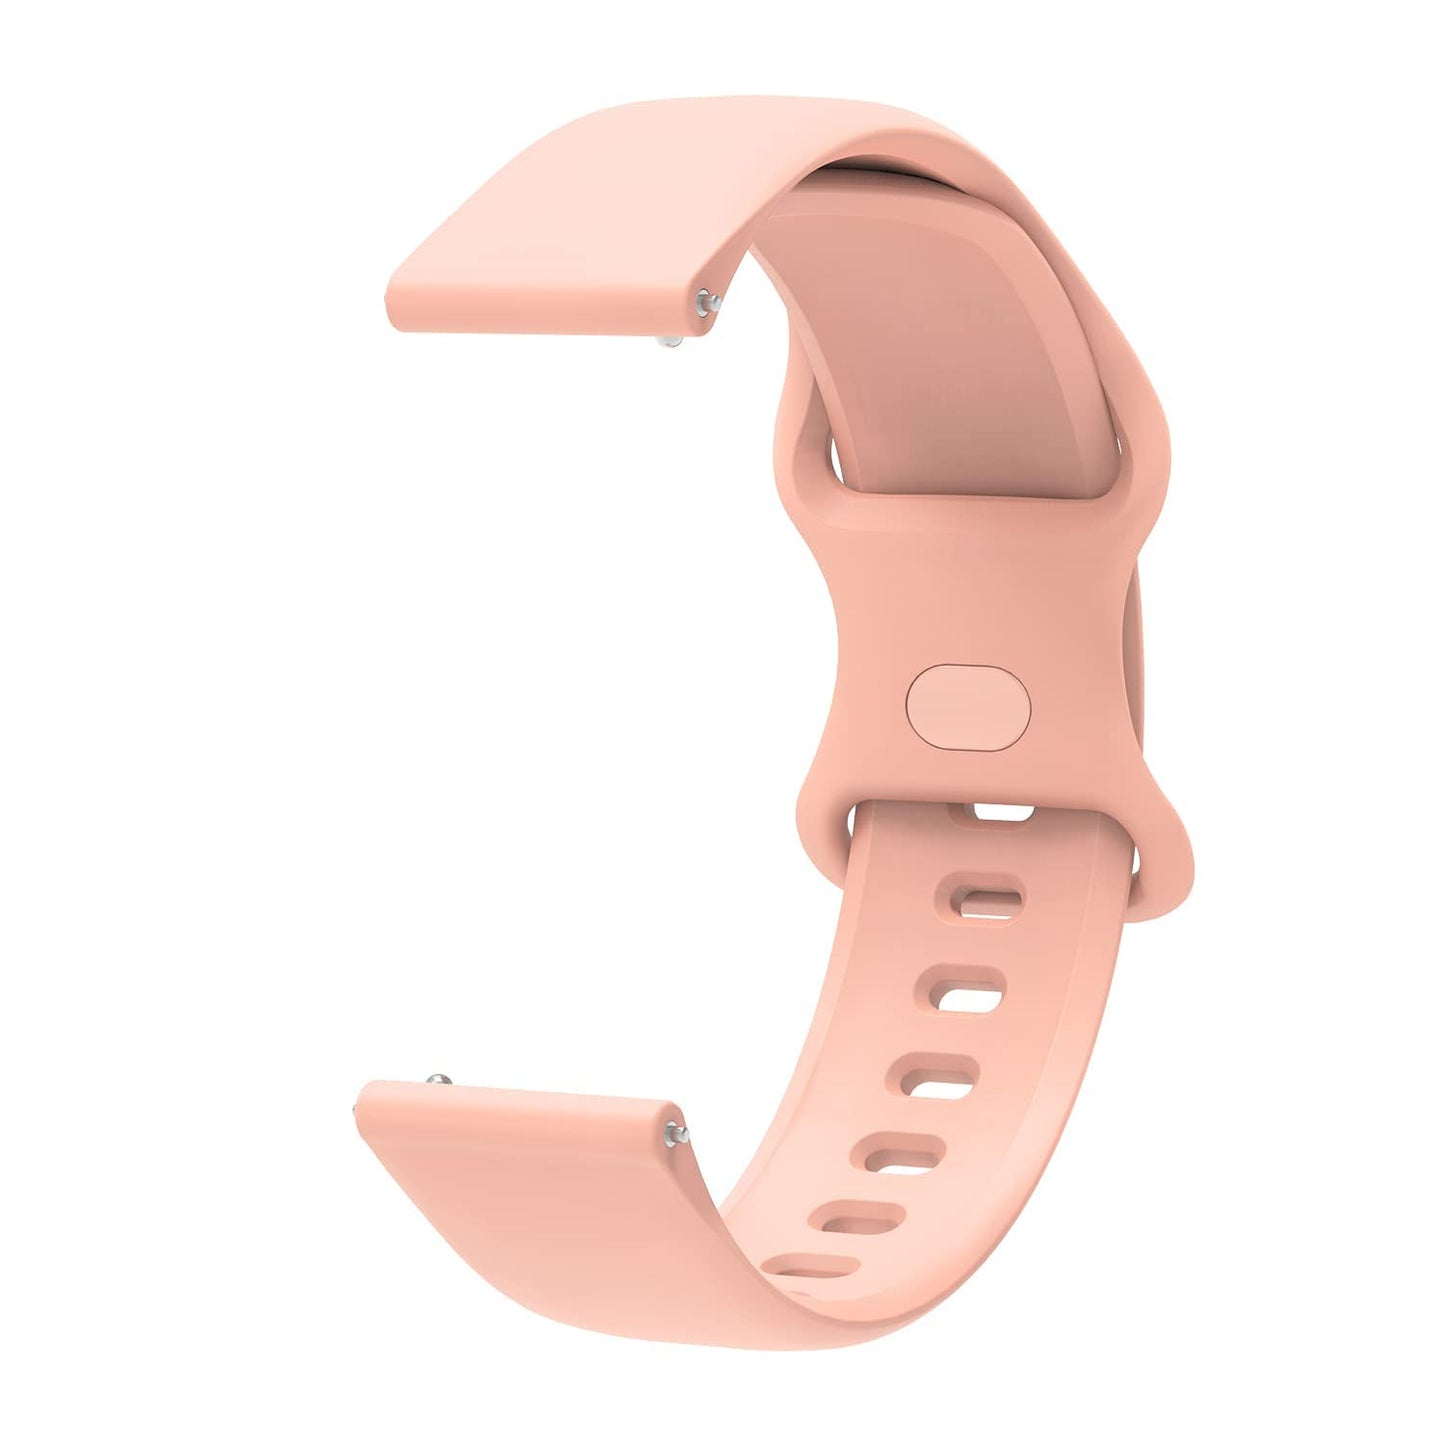 Valente Silicone Double Lock 20mm Watch Strap Compatible with Galaxy Watch Active 2(40mm & 44mm),Active(40mm), Watch 3(41mm),Amazfit Bip,GTR(42mm),GTS & GTS 2 Mini,Dizo Watch 2, Oneplus Nord Watch